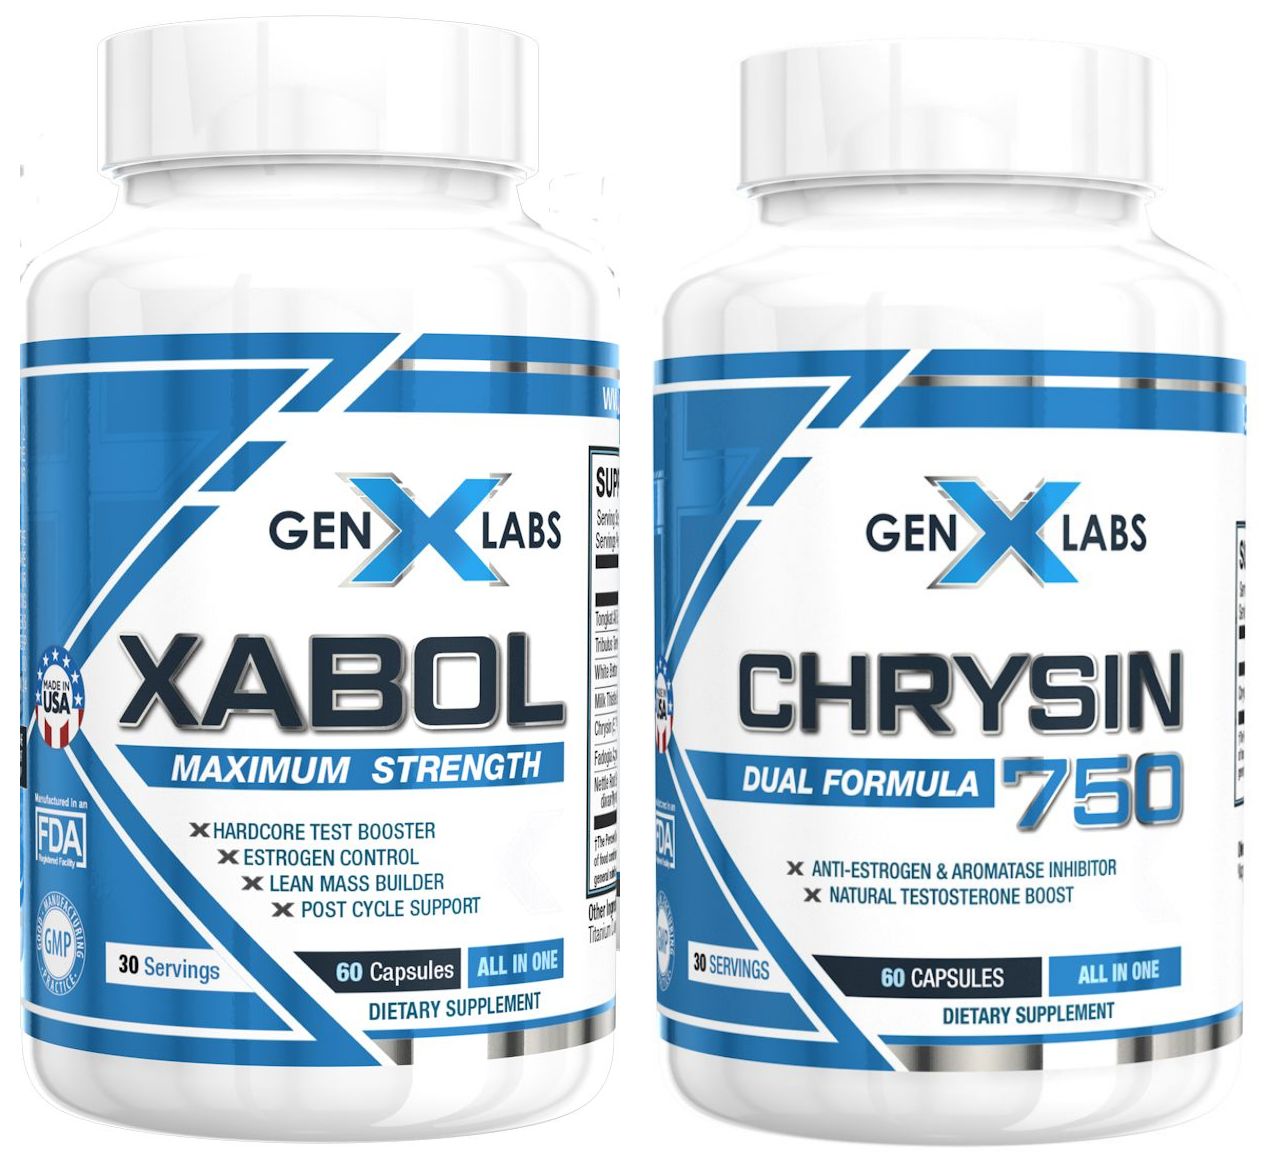 GenXLabs The Best PCT Stack Xabol with Chrysin 750